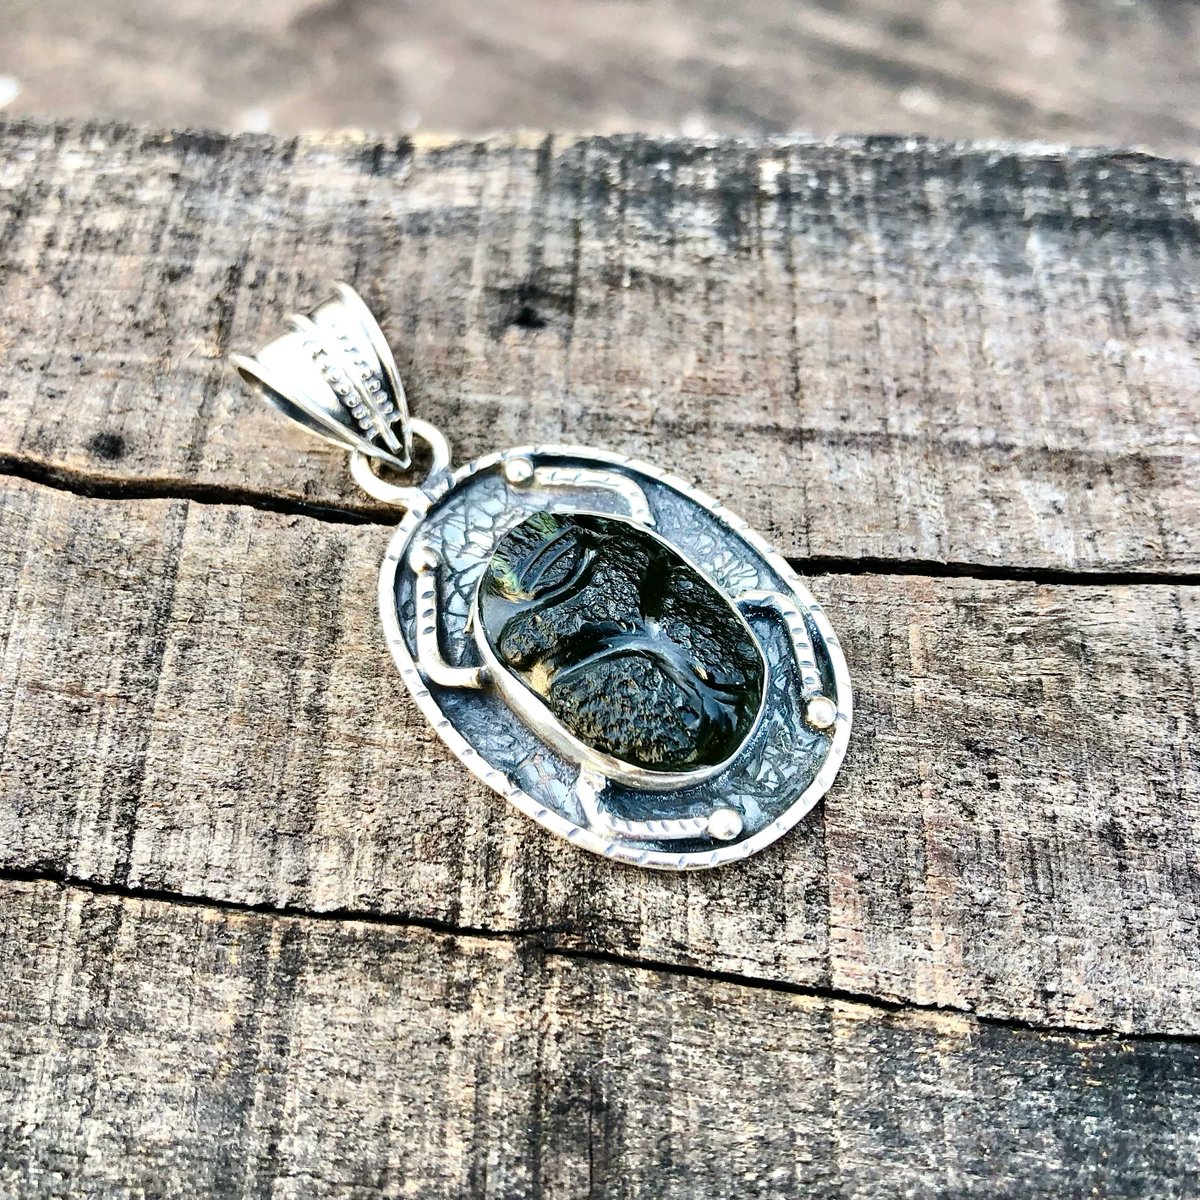 Excited to share big size #scarab #moldavite #silver #pendant in my #etsy shop
etsy.me/49JGXAJ
#shopnow #beetle #moldavitecarving #scarabbeetle #handcarved #czech #green #meteorite #starborn #outerspace #mothersdaygift #freeshipping #sale #discount #offers #art #Wisdom